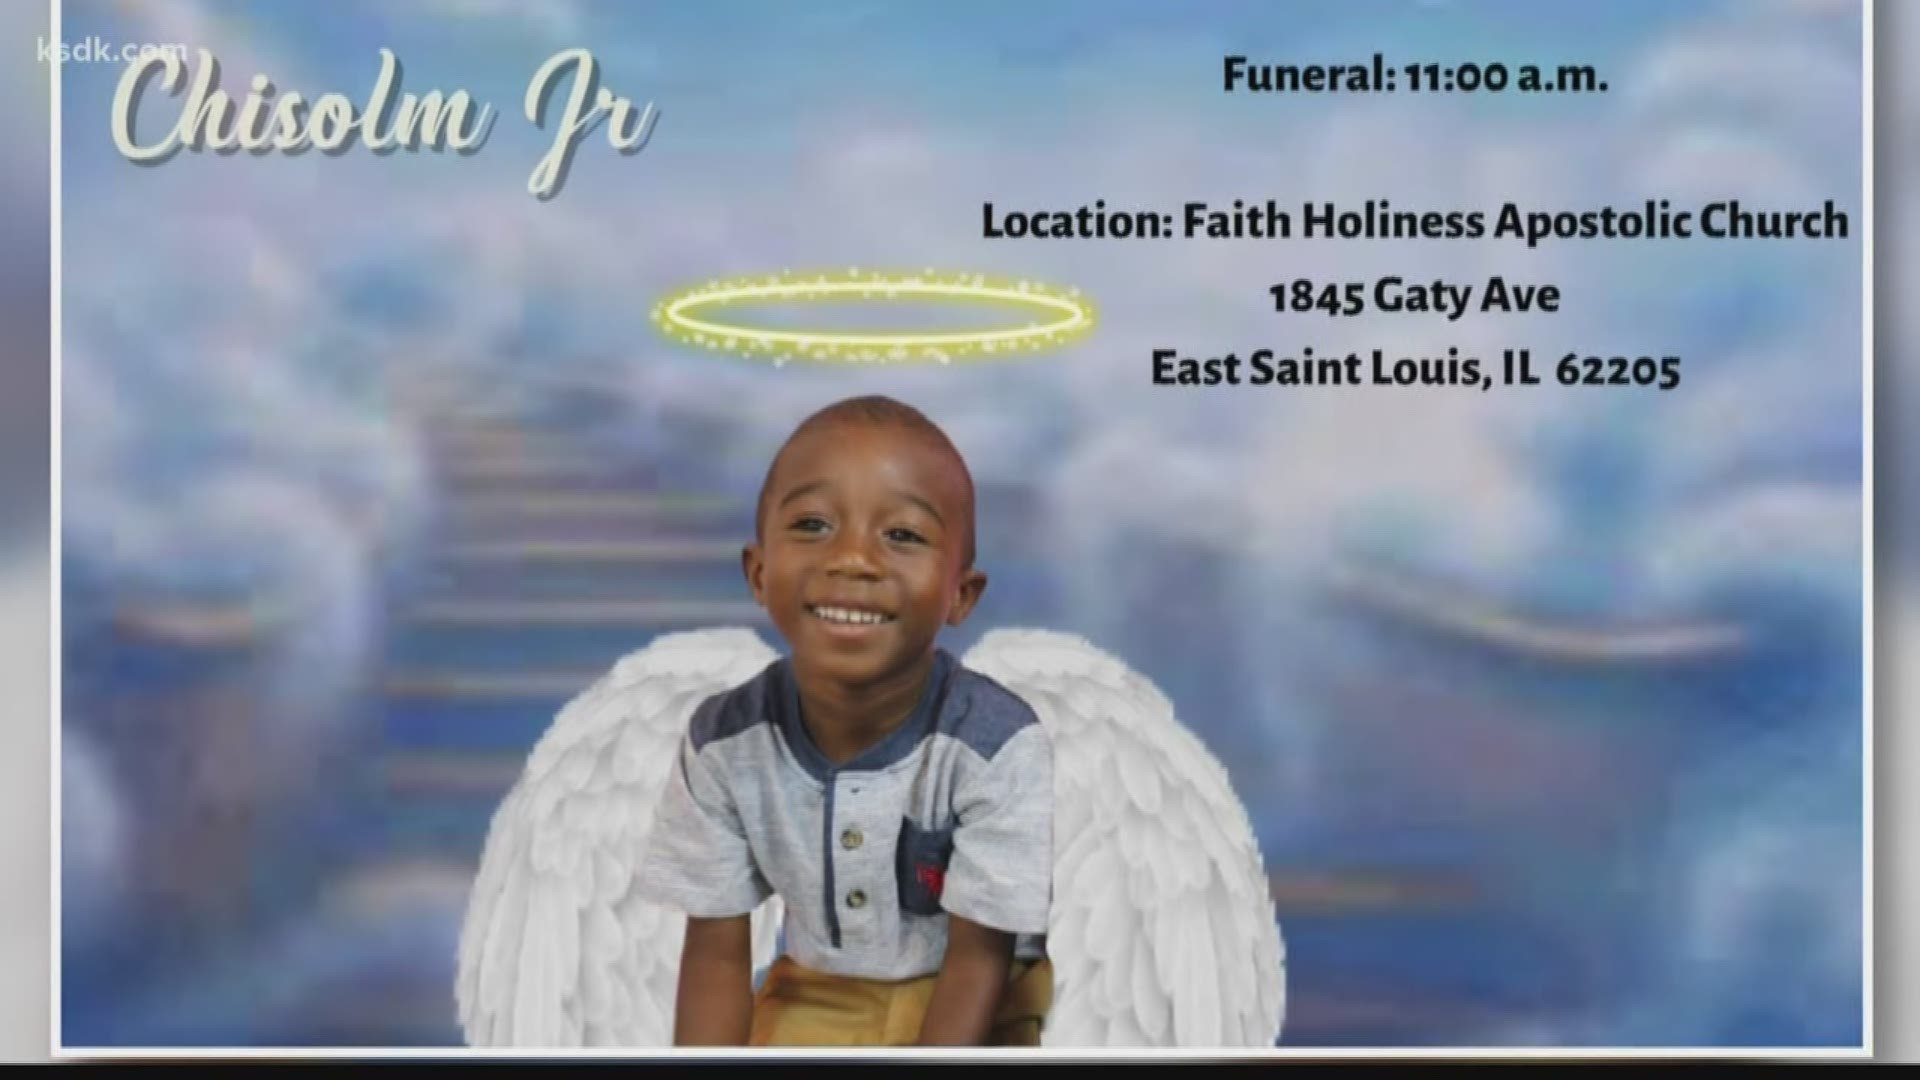 The 4-year-old boy will be laid to rest Monday. He was killed in a hit-and-run crash on Oct. 4.